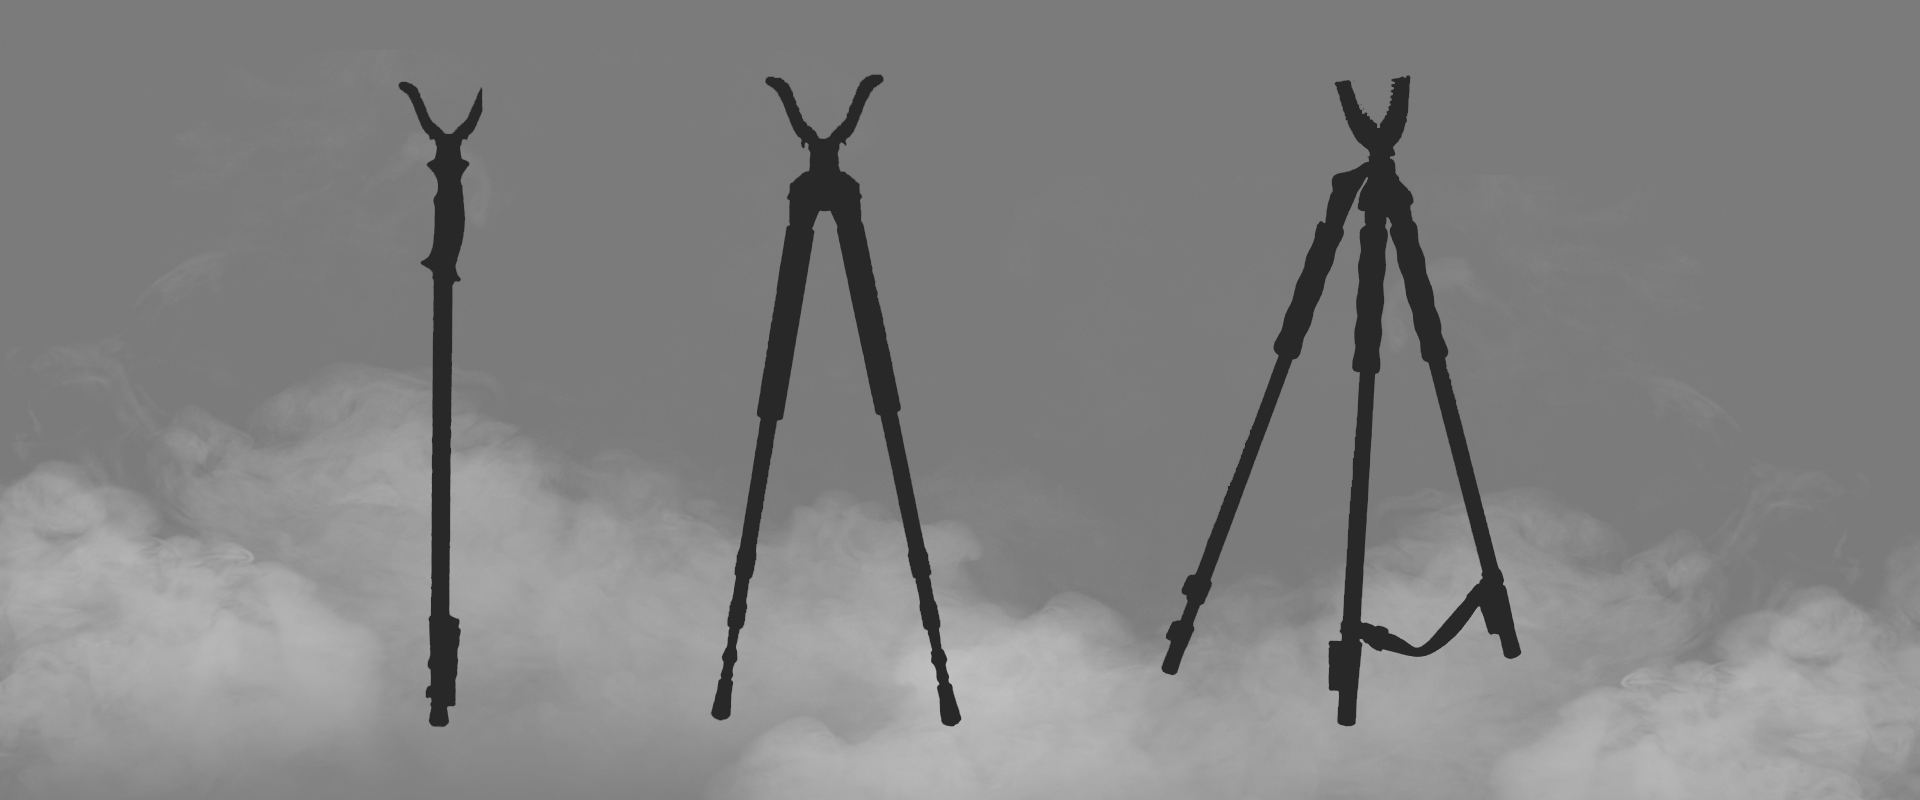 Tripods, Bipods, & Monopods